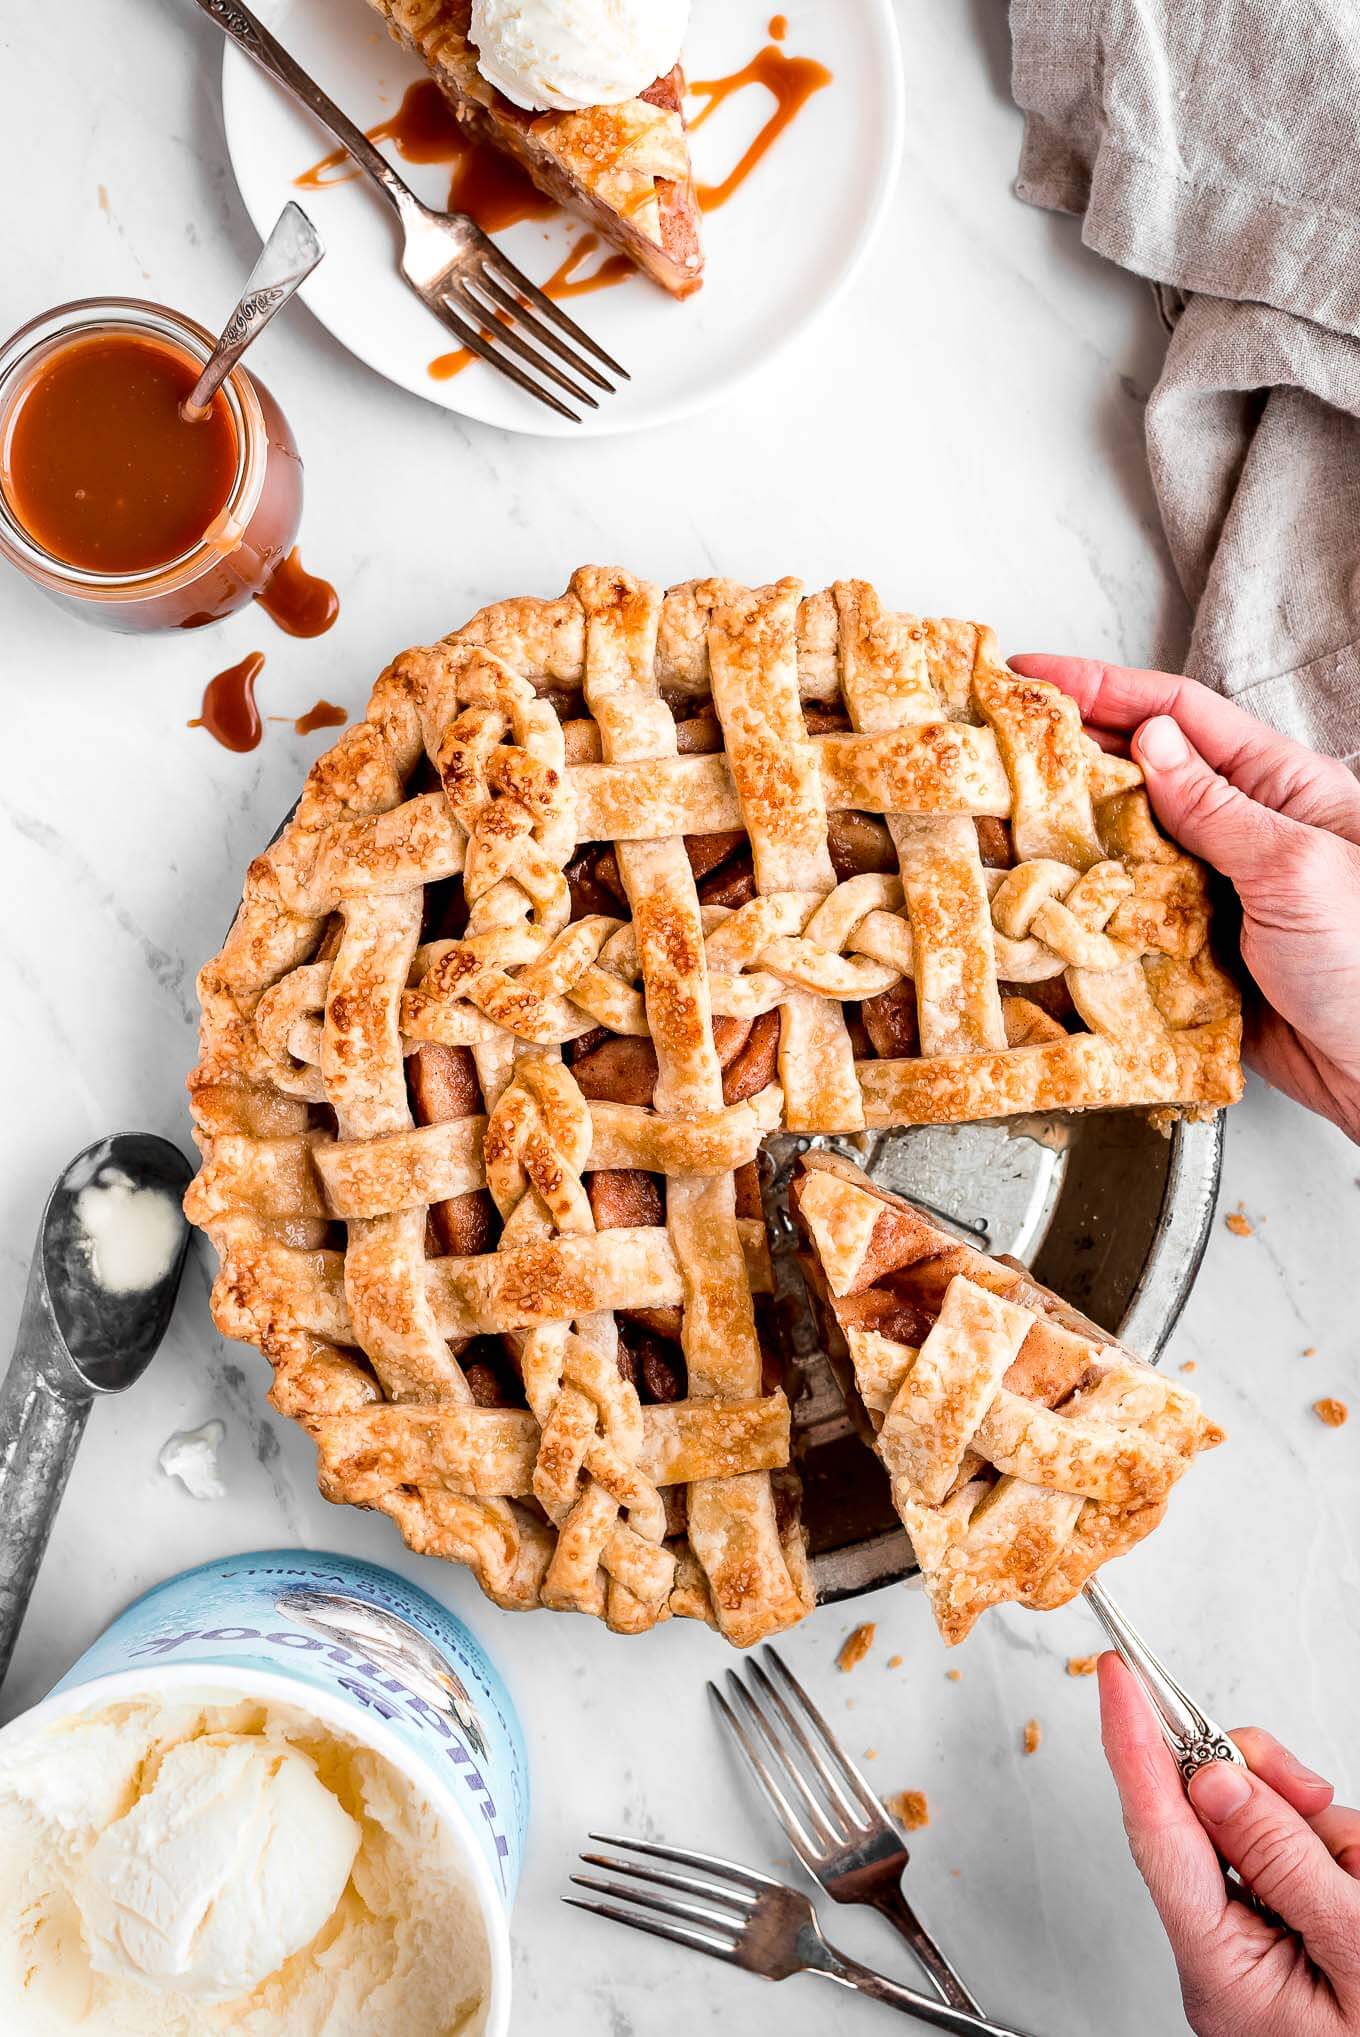 Pear Pie with a carton of vanilla ice cream, ice cream scoop, jar of caramel sauce, and a slice of pie surrounding it with a hand lifting out a slice of pie with a pie server.